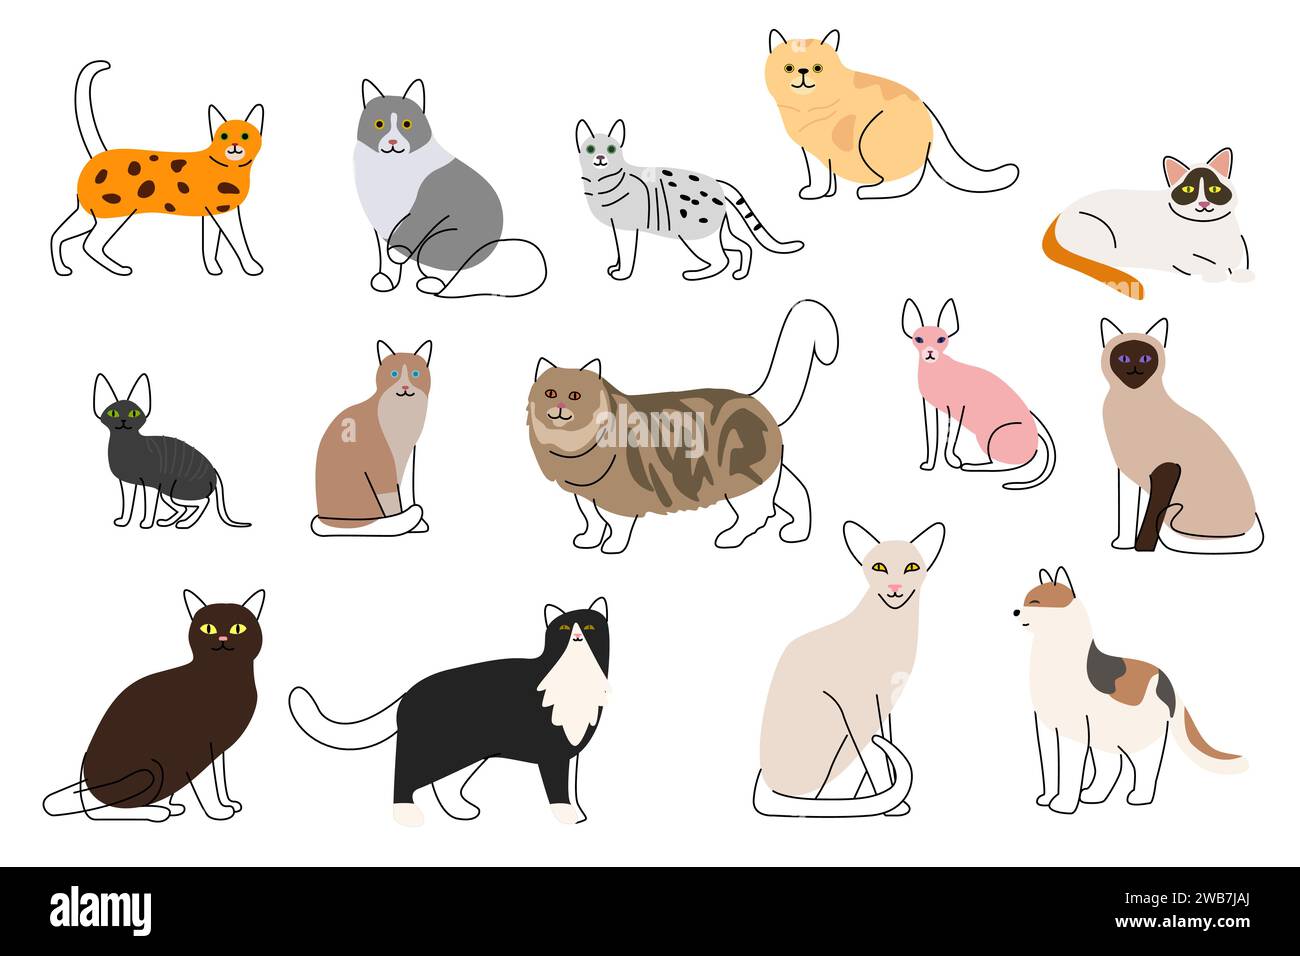 A vector illustration of Different Cute Cat Icons Stock Vector